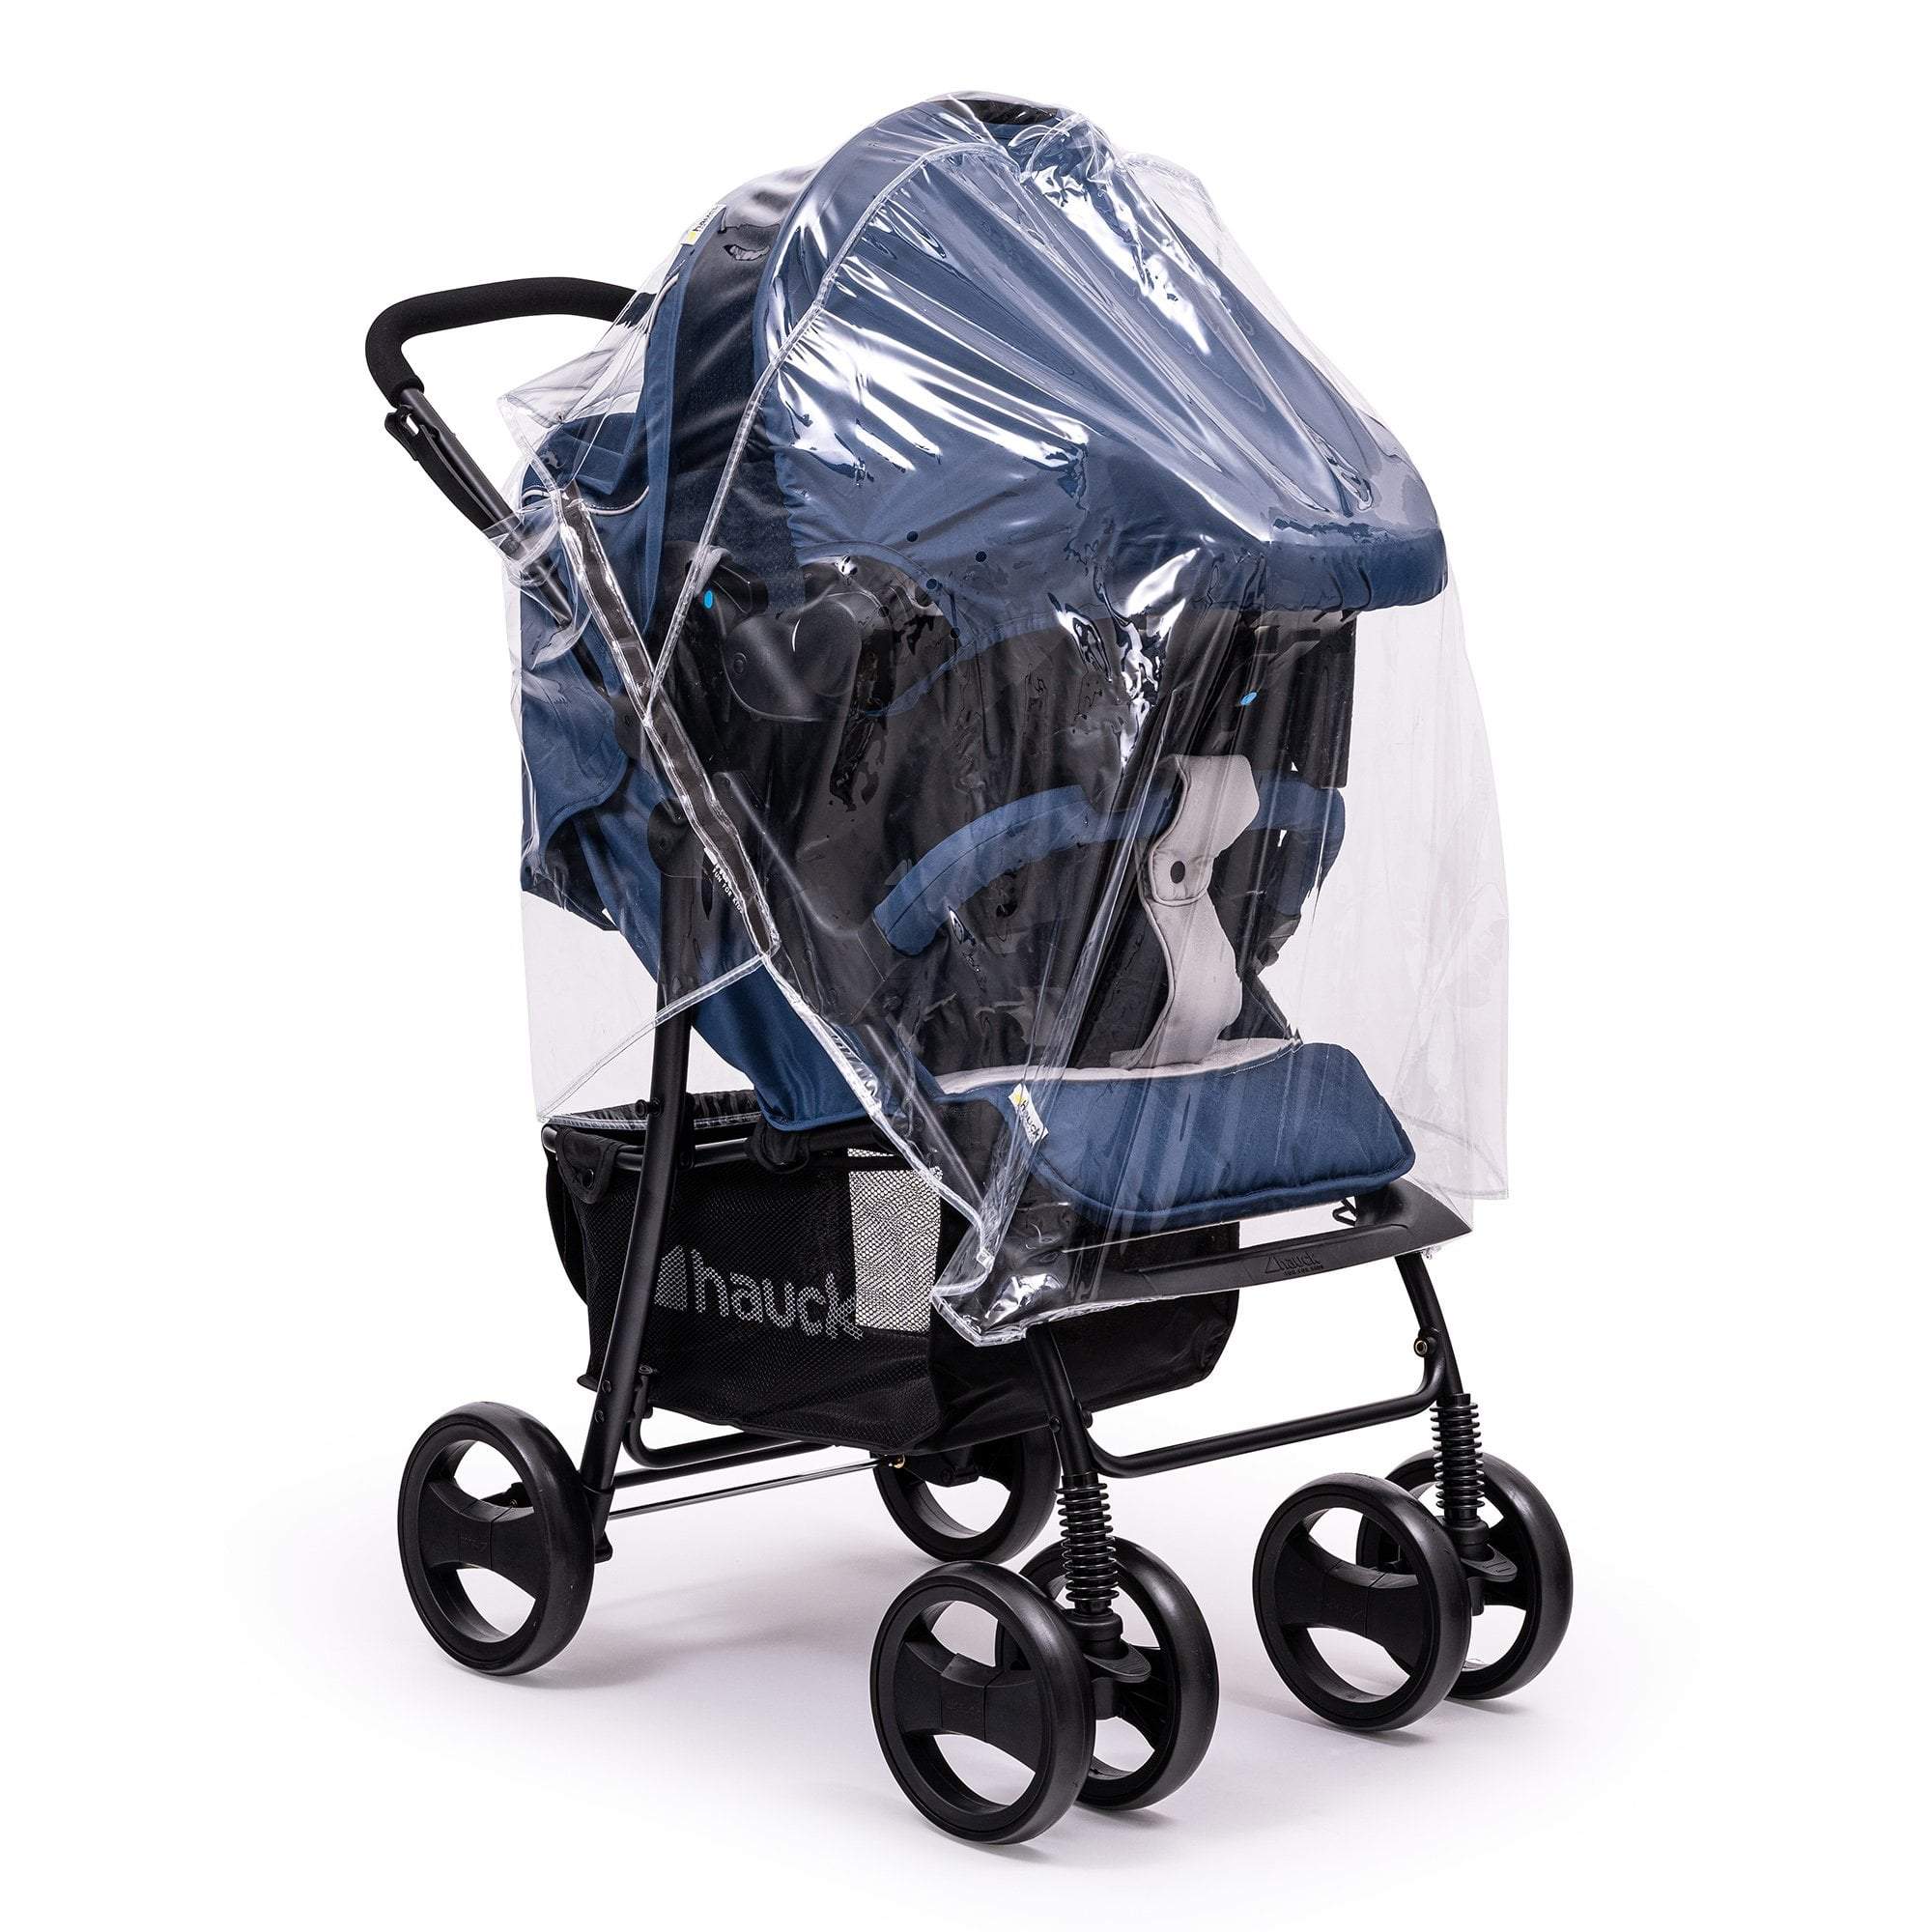 Travel System Raincover Compatible with Joolz - Fits All Models - For Your Little One